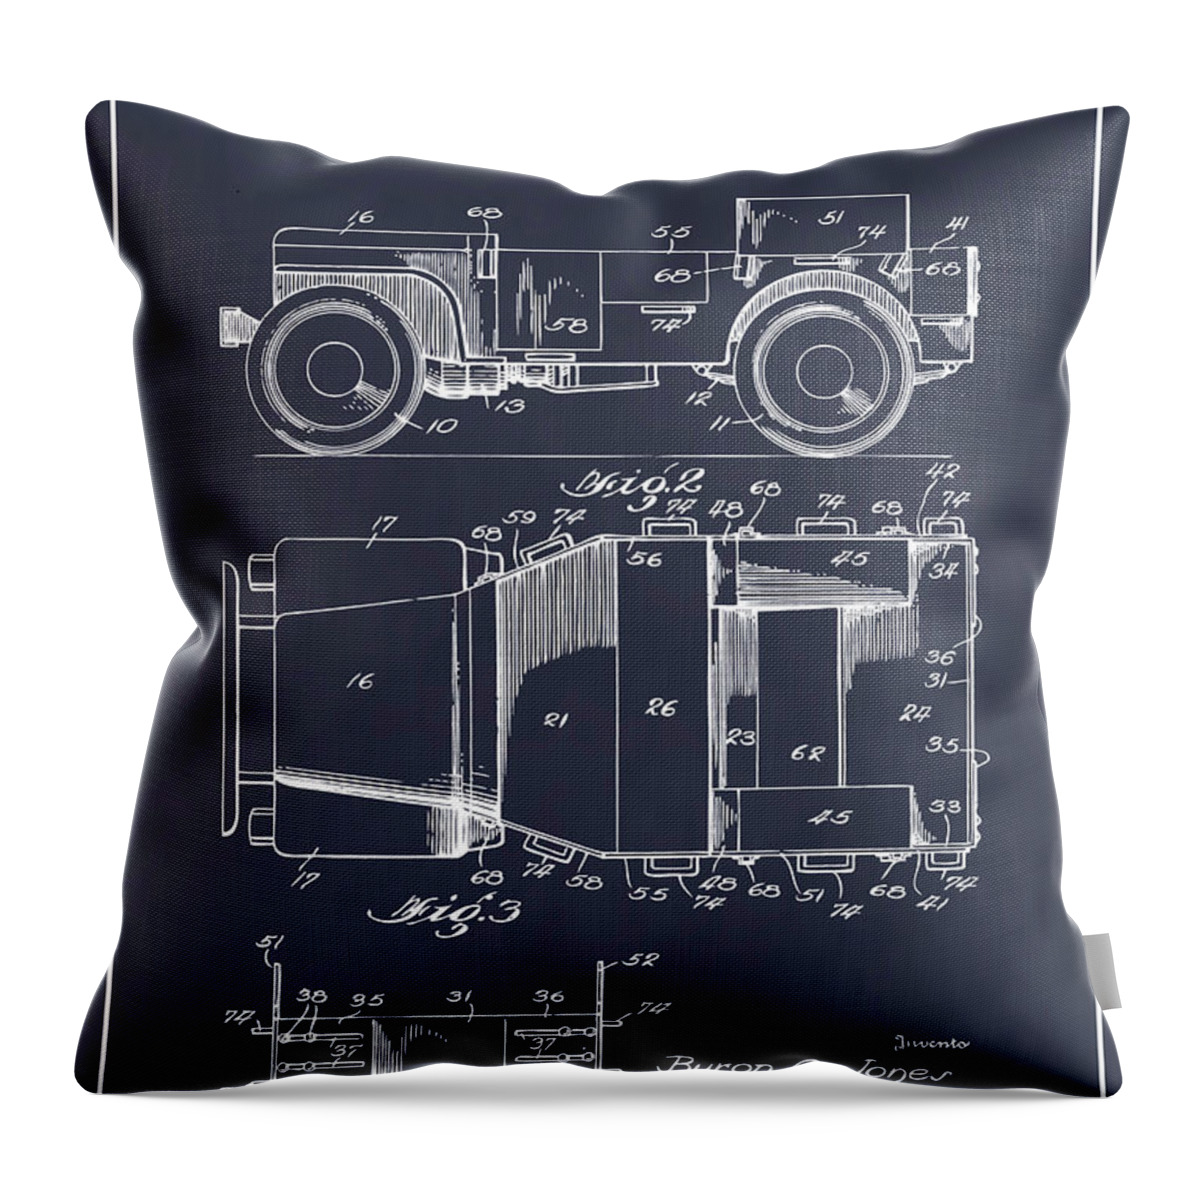 1941 Jeep Military Vehicle Patent Print Throw Pillow featuring the drawing 1941 Jeep Military Vehicle Blackboard Patent Print by Greg Edwards